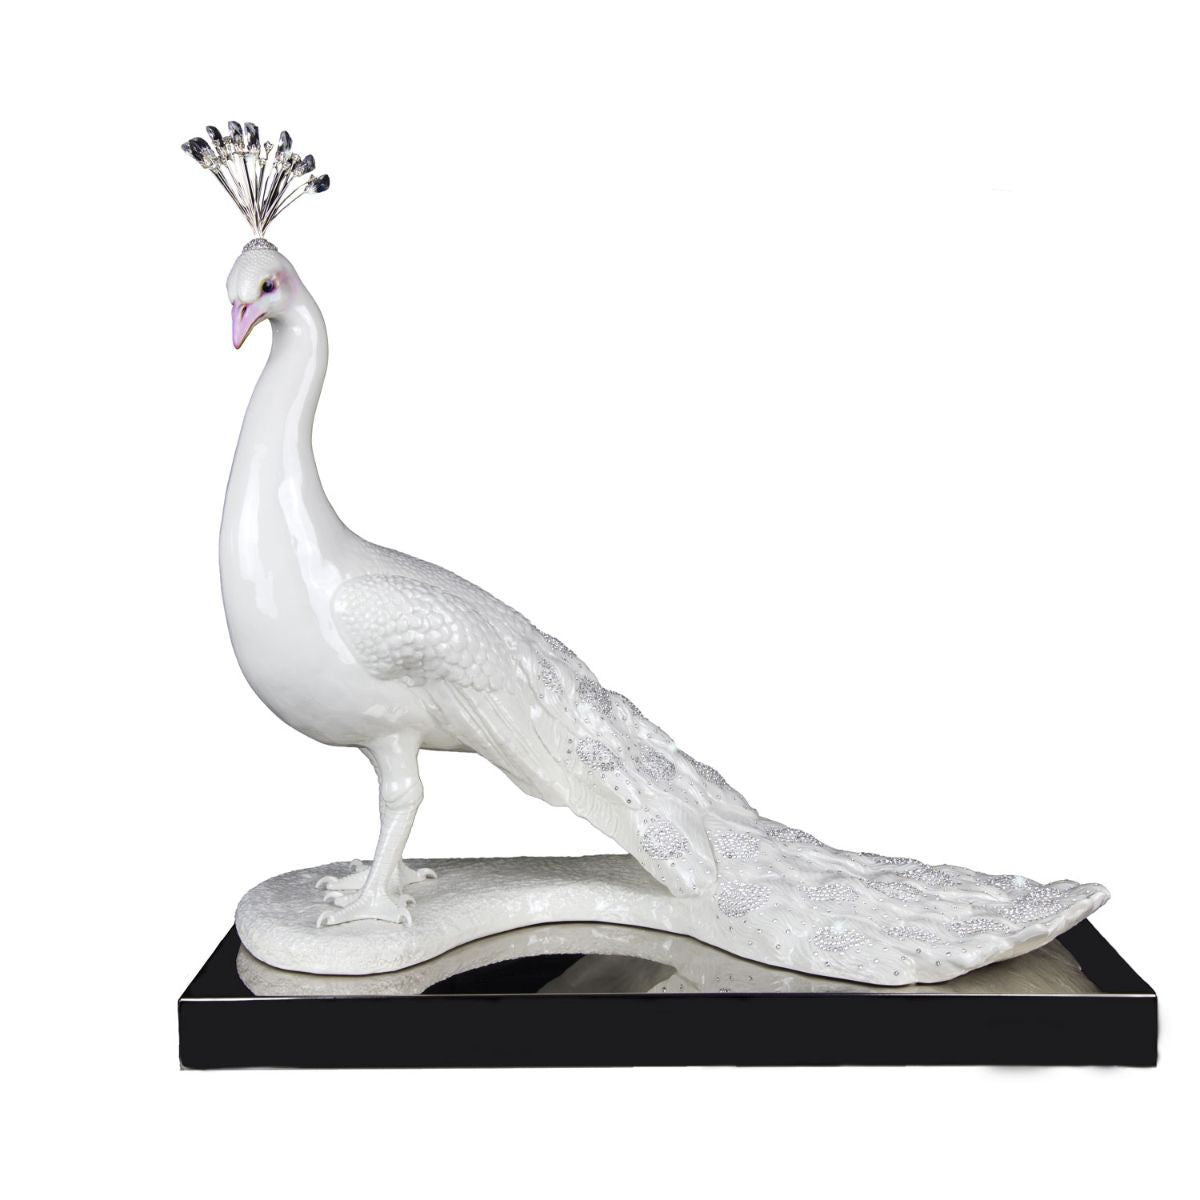 Royal Peacock with Swarovski® - Limited Edition 88 Pcs - White